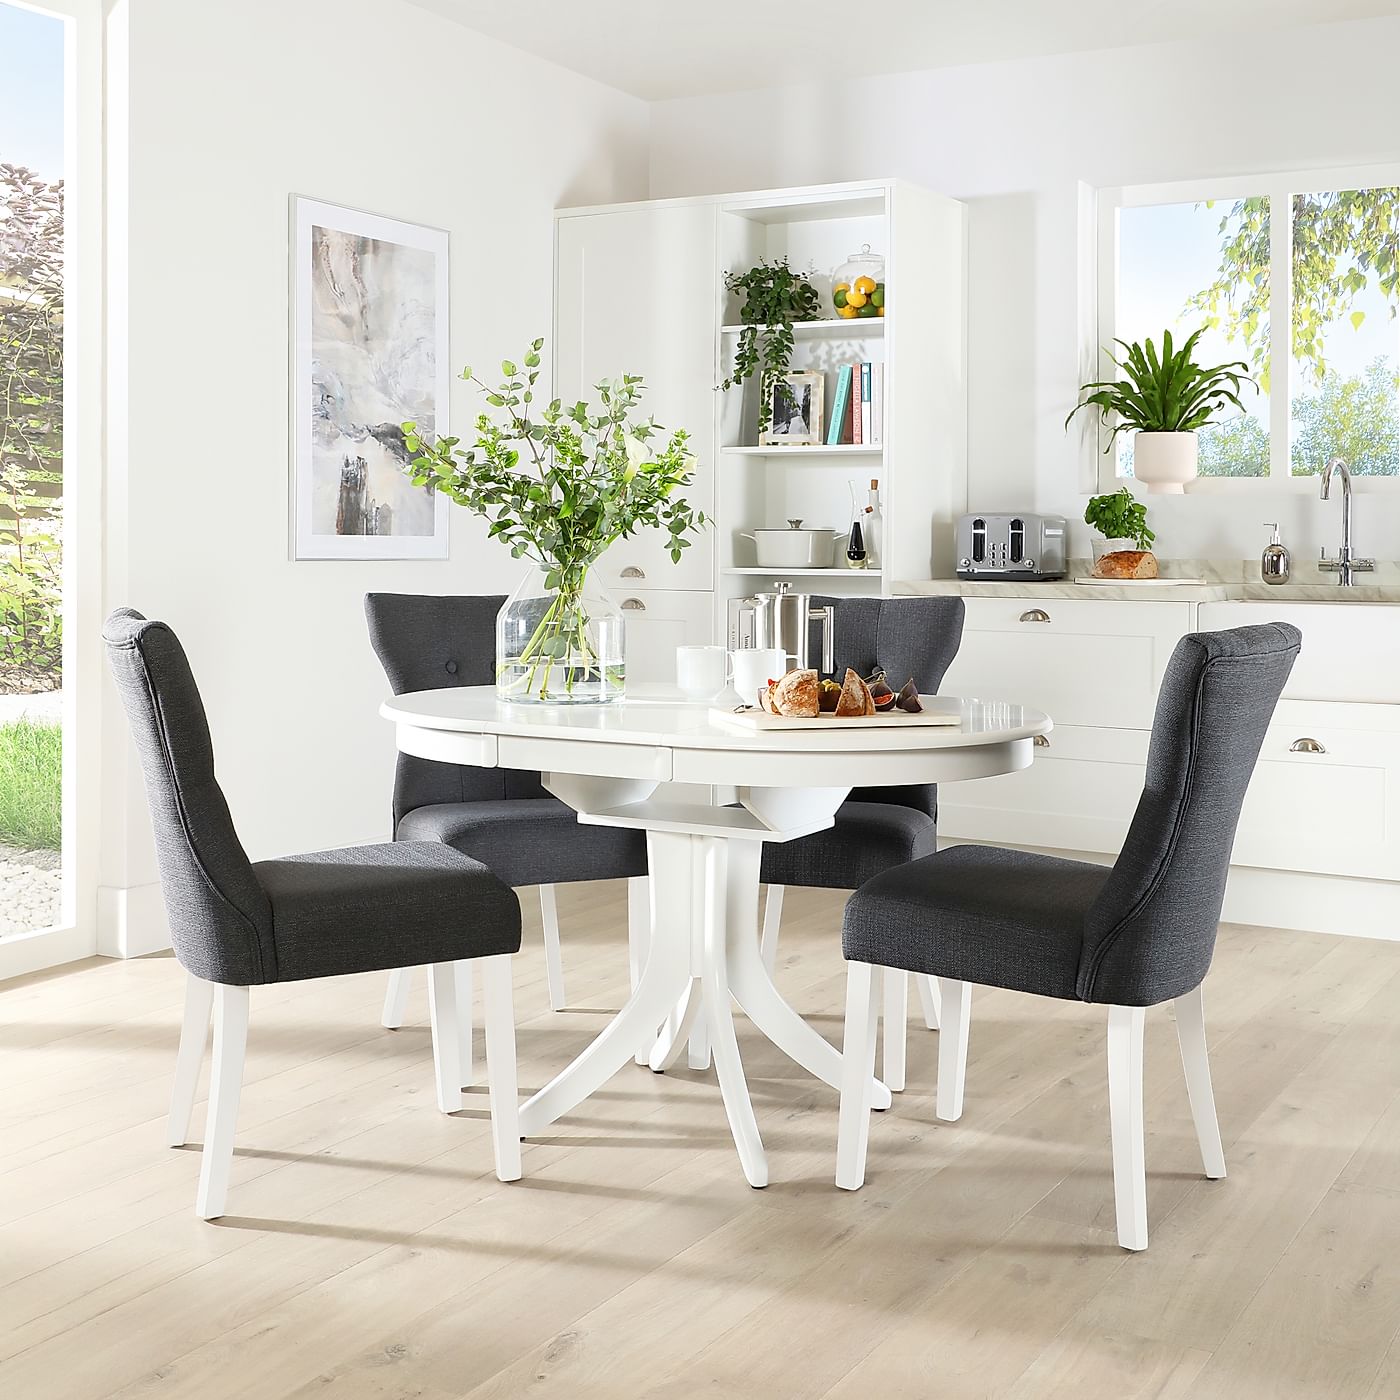 20 Terrific Small Round Kitchen Tables - Home, Decoration, Style and